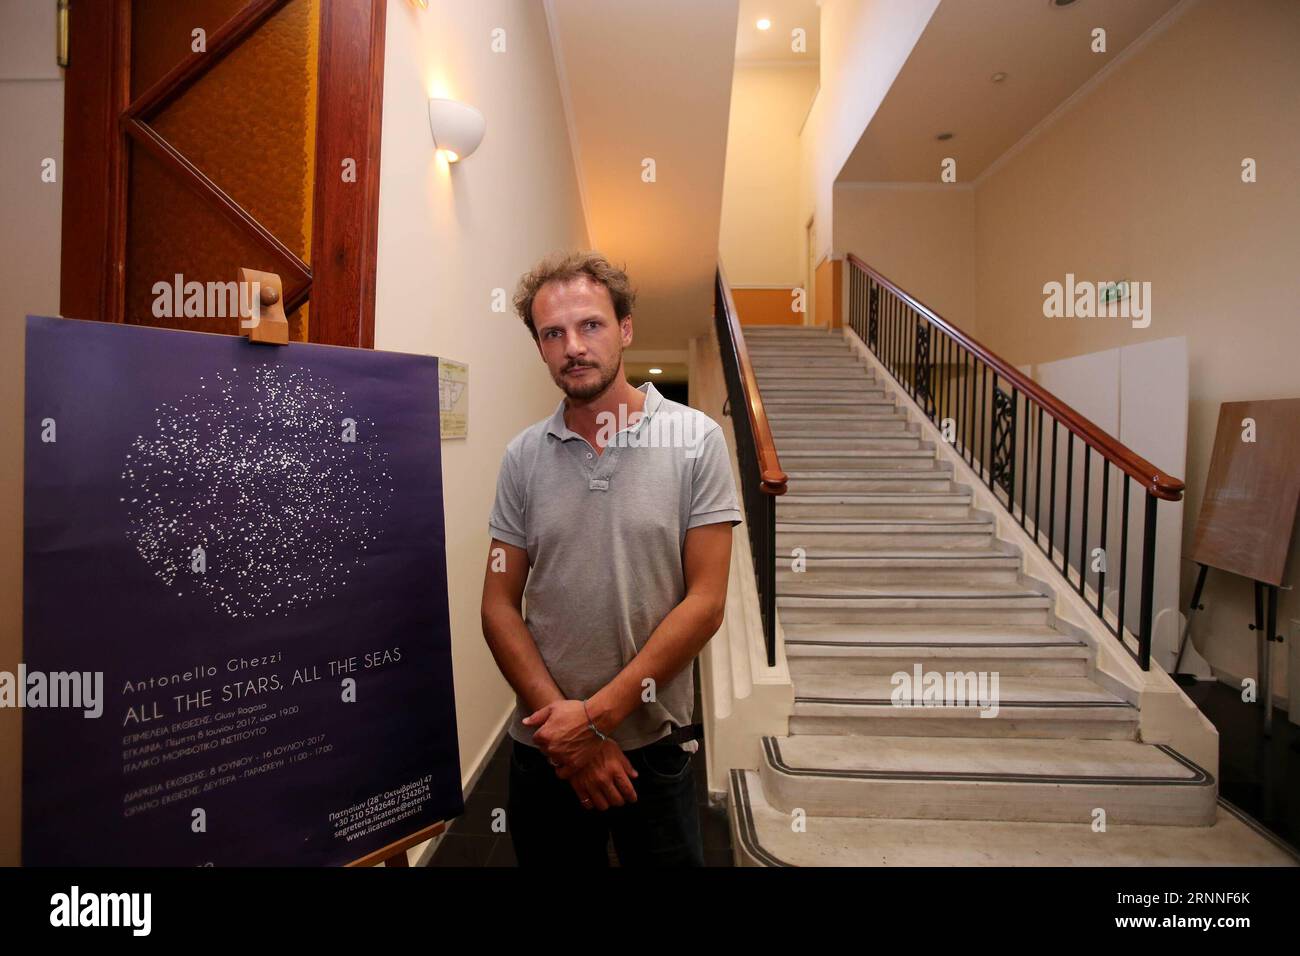 (170711) -- ATHENS, July 11, 2017 -- Photo taken on July 5 shows Italian artist Paolo Ghezzi at the entrance of the exhibition All the Stars, All the Seas in Athens, Greece. Two years into the crisis which has tested Europe, Italian art collective Antonello Ghezzi chose Greece, a country at the forefront of the mass influx of refugees and migrants, to launch their new project aimed to convey the message of unity and solidarity. The exhibition All the Stars, All the Seas is dedicated to the migrants and refugees, to all people adrift and to the fact that we are all united by the sea and the sky Stock Photo